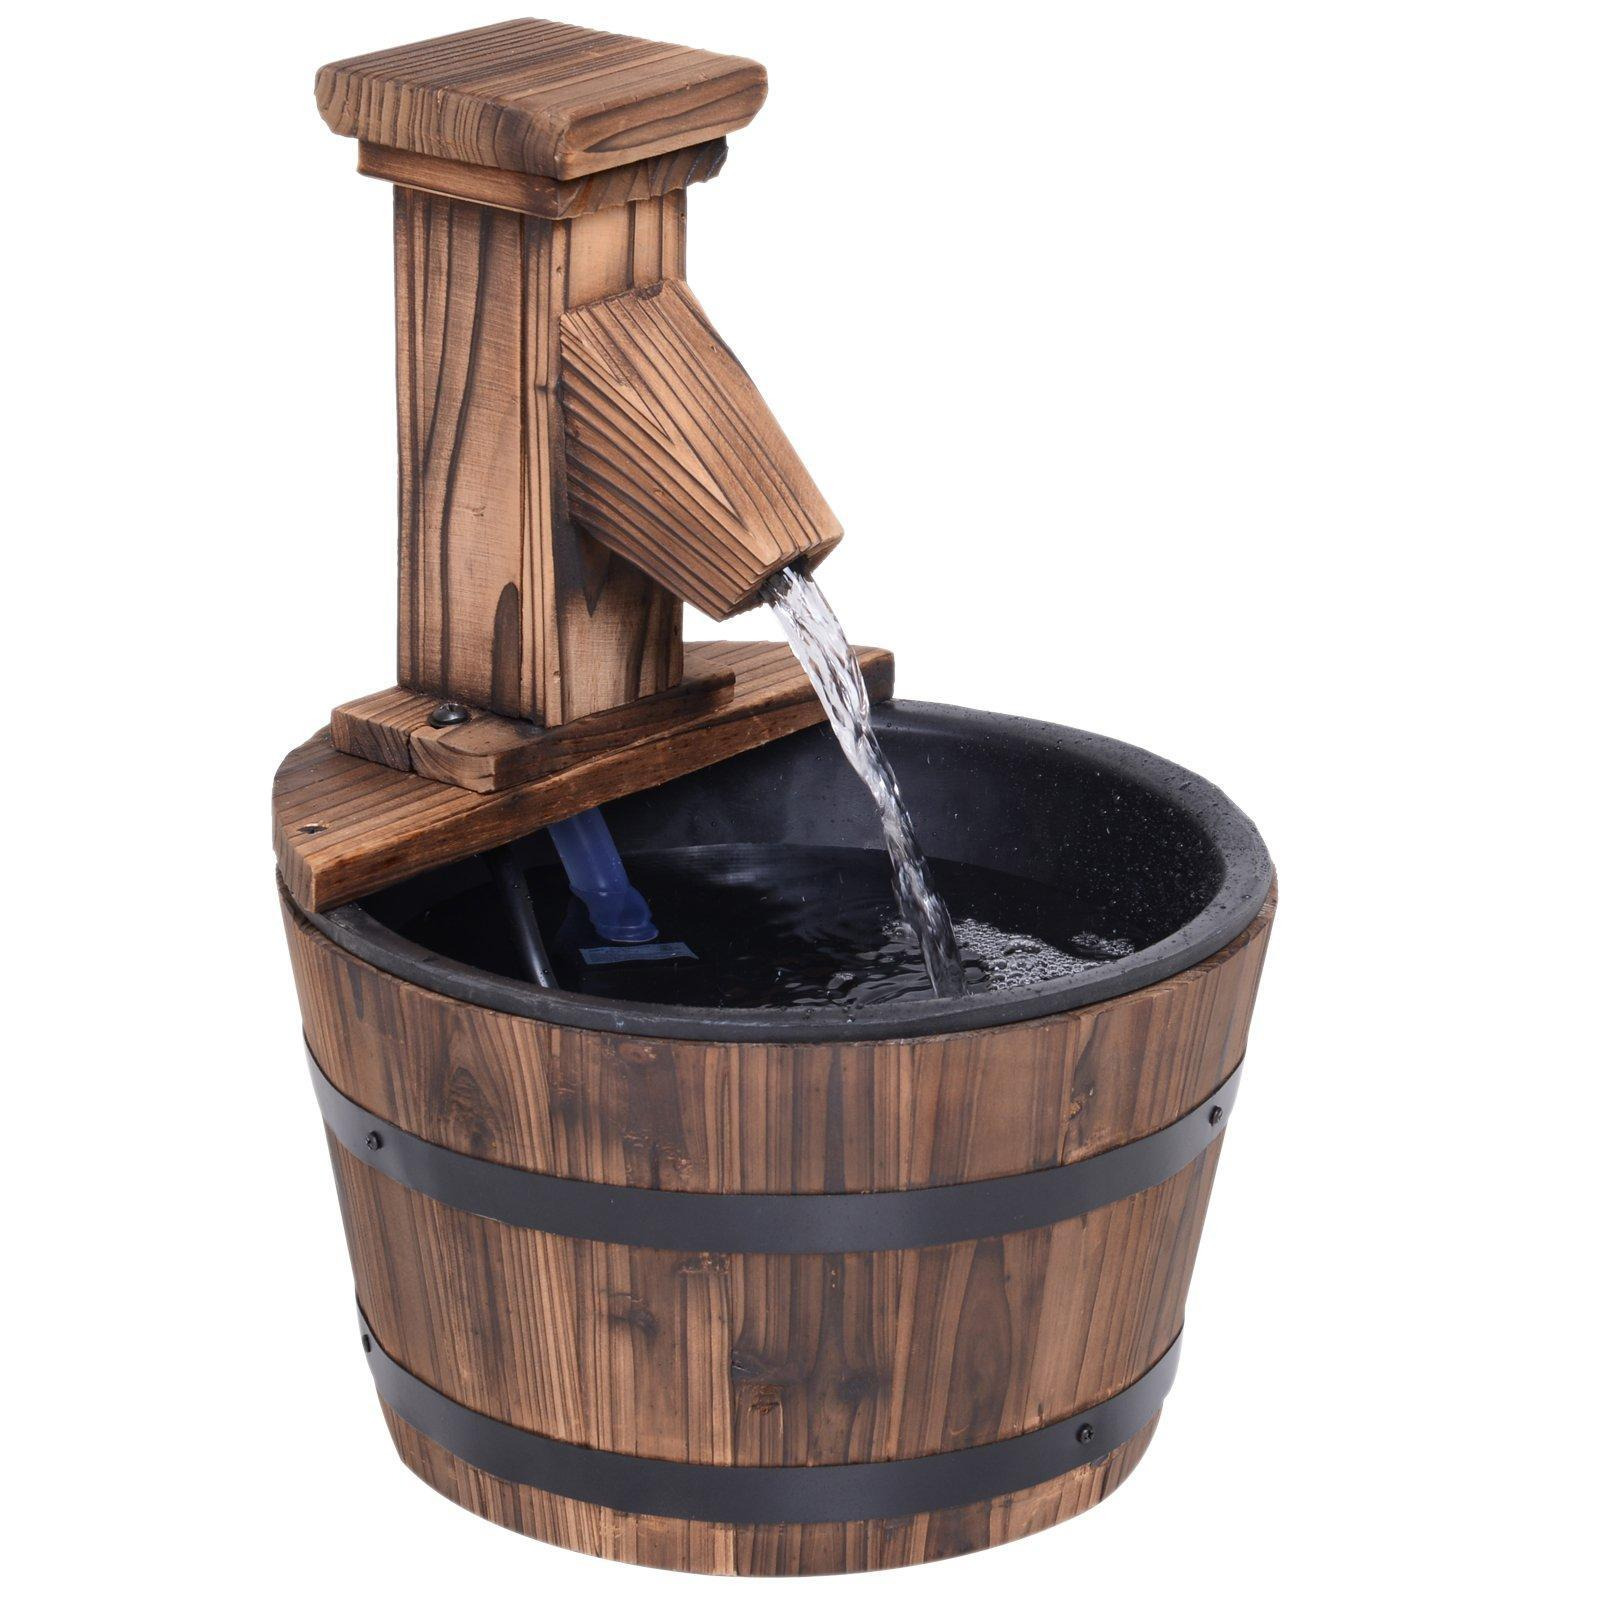 Wood Barrel Patio Water Fountain Water Feature with Electric Pump for Garden - image 1